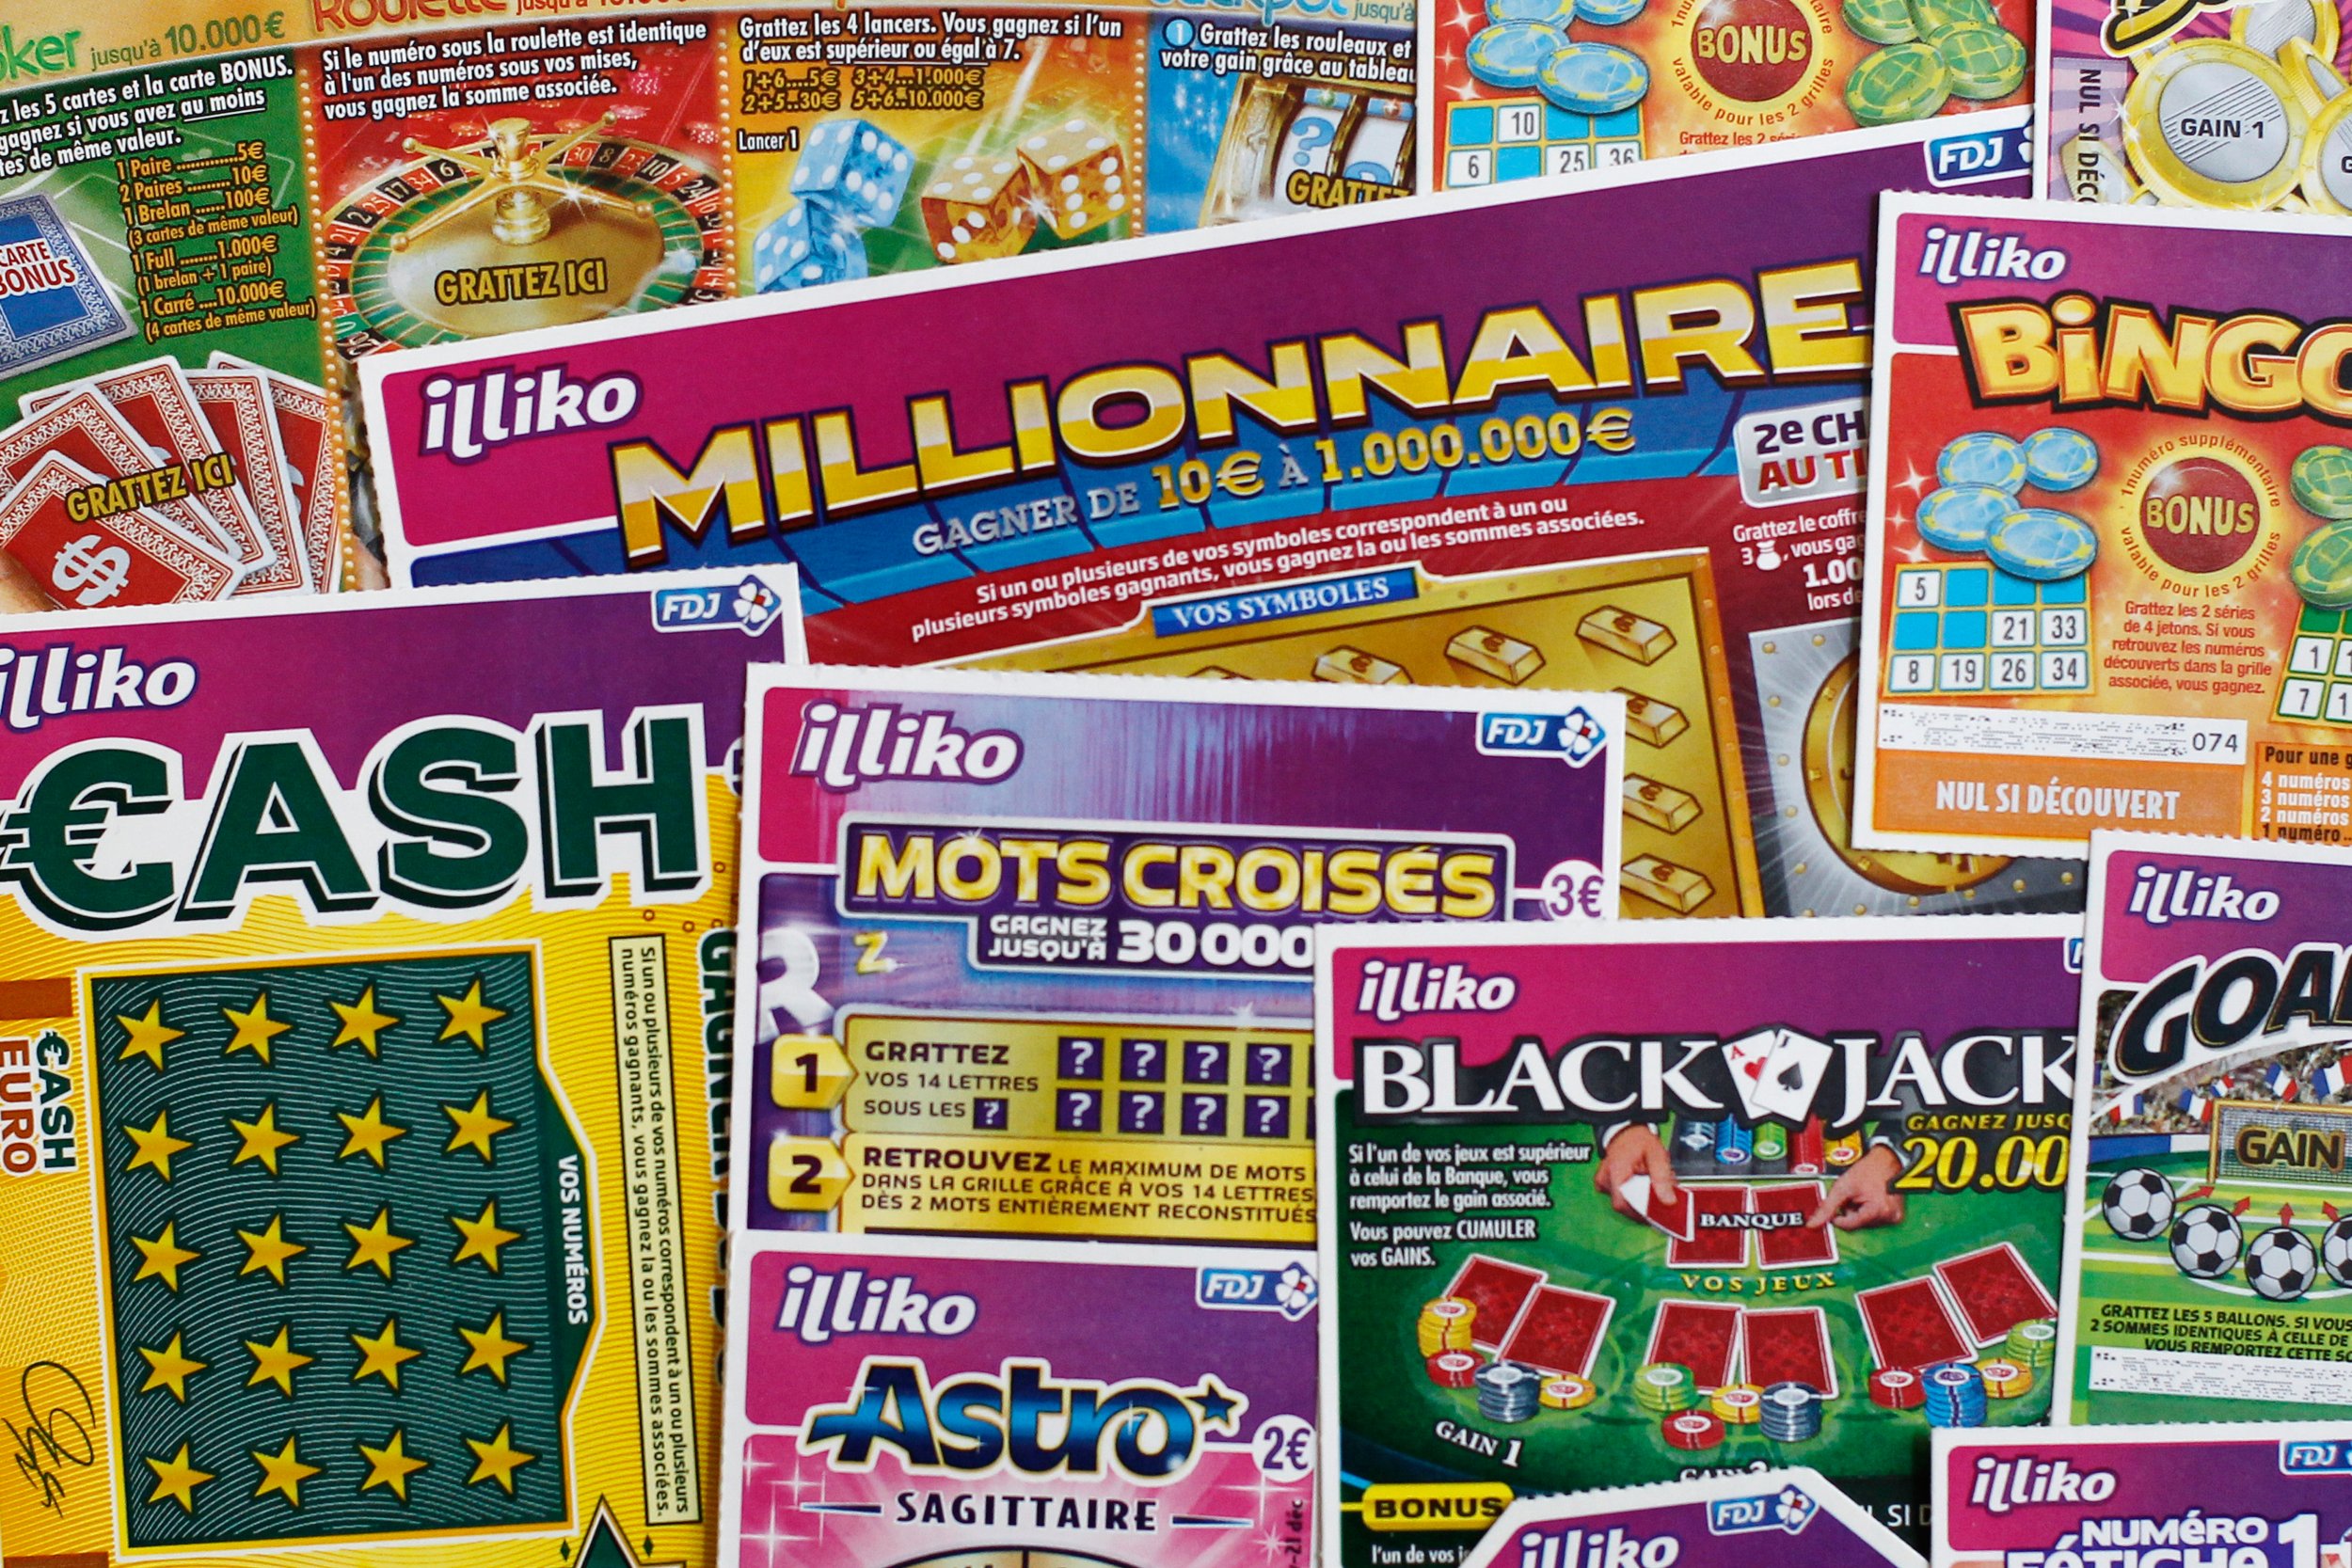 Five Reasons to Spend Less Money on Lottery Tickets (and More Elsewhere)